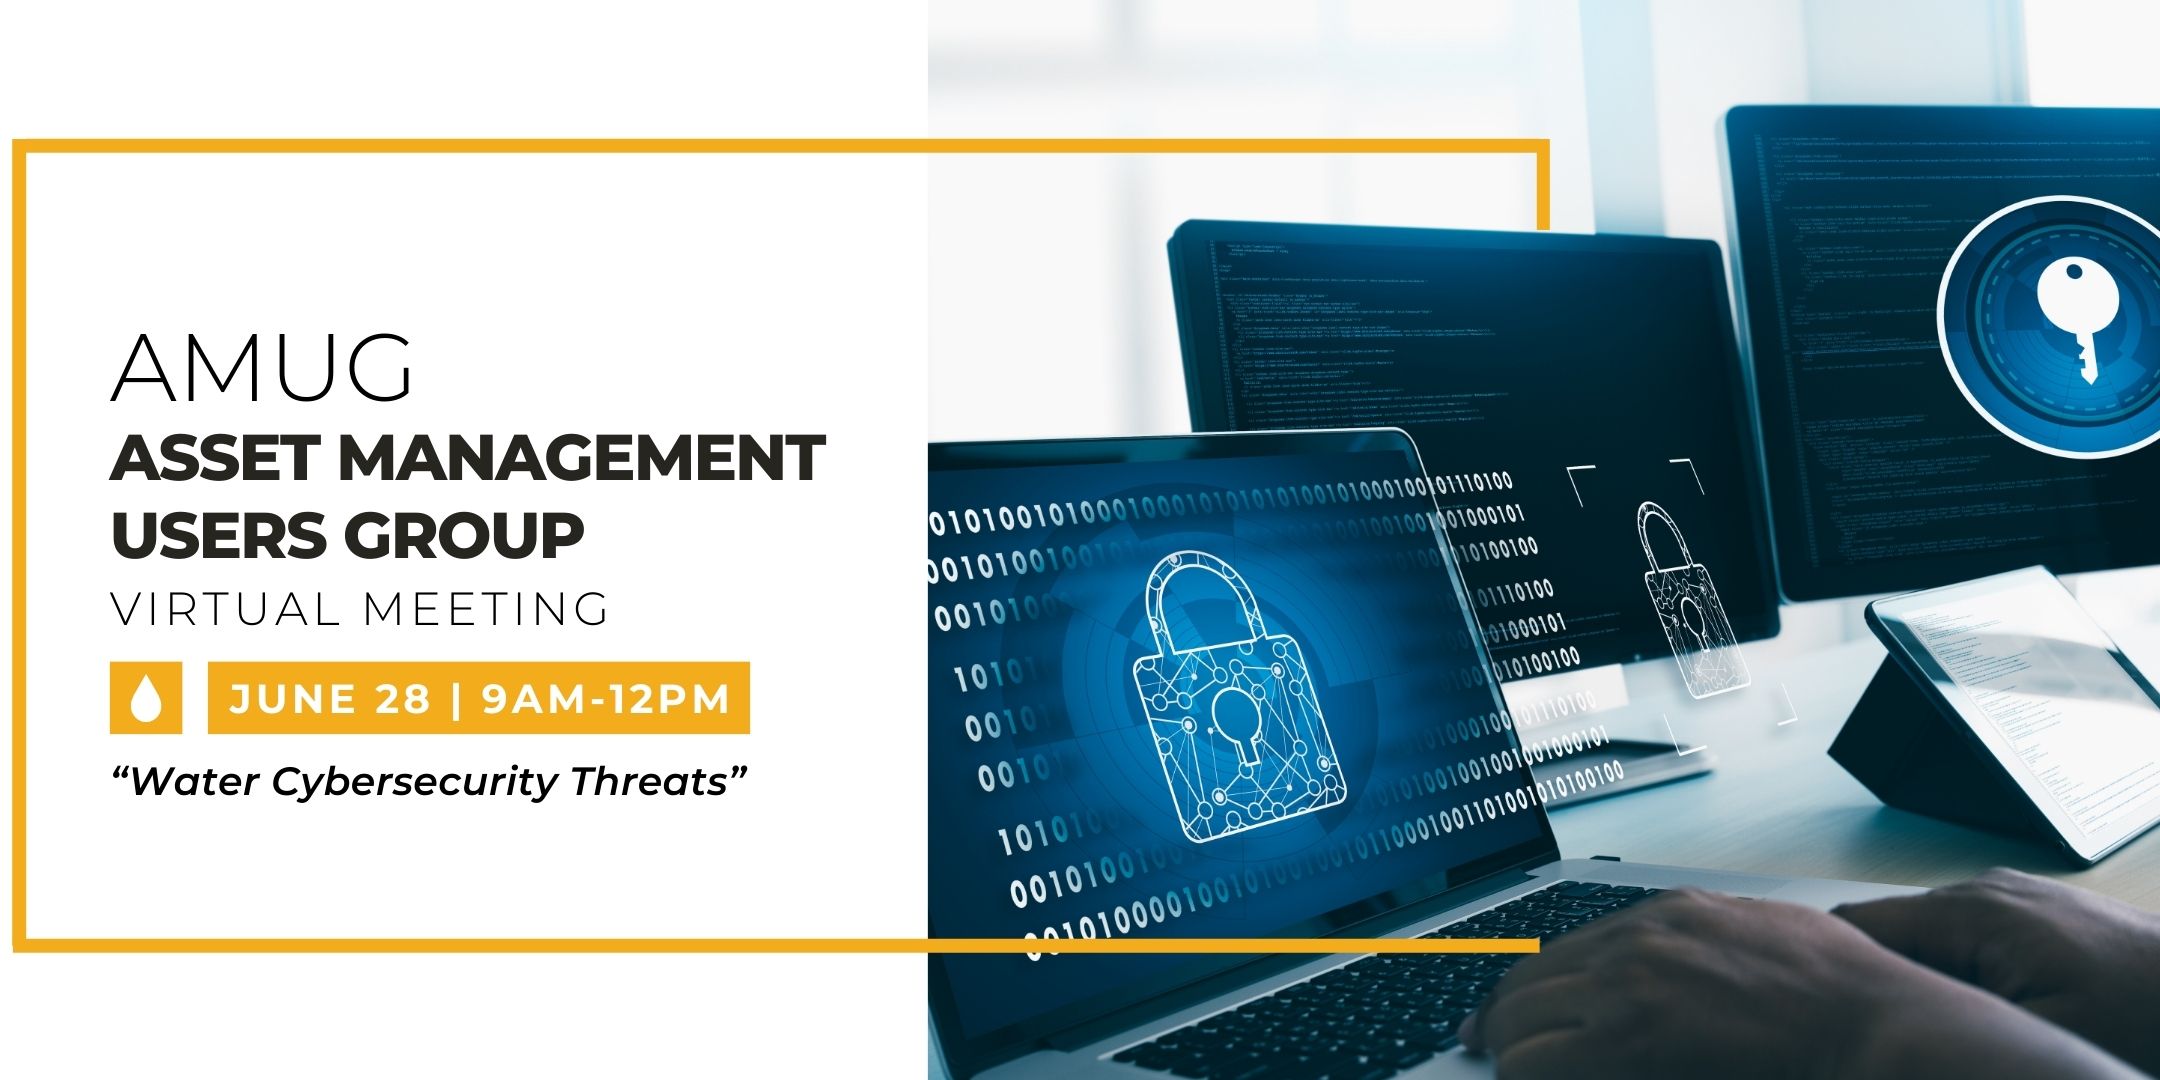 AMUG, Asset Management Users Group Virtual Meeting, June 28, Cybersecurity Threats